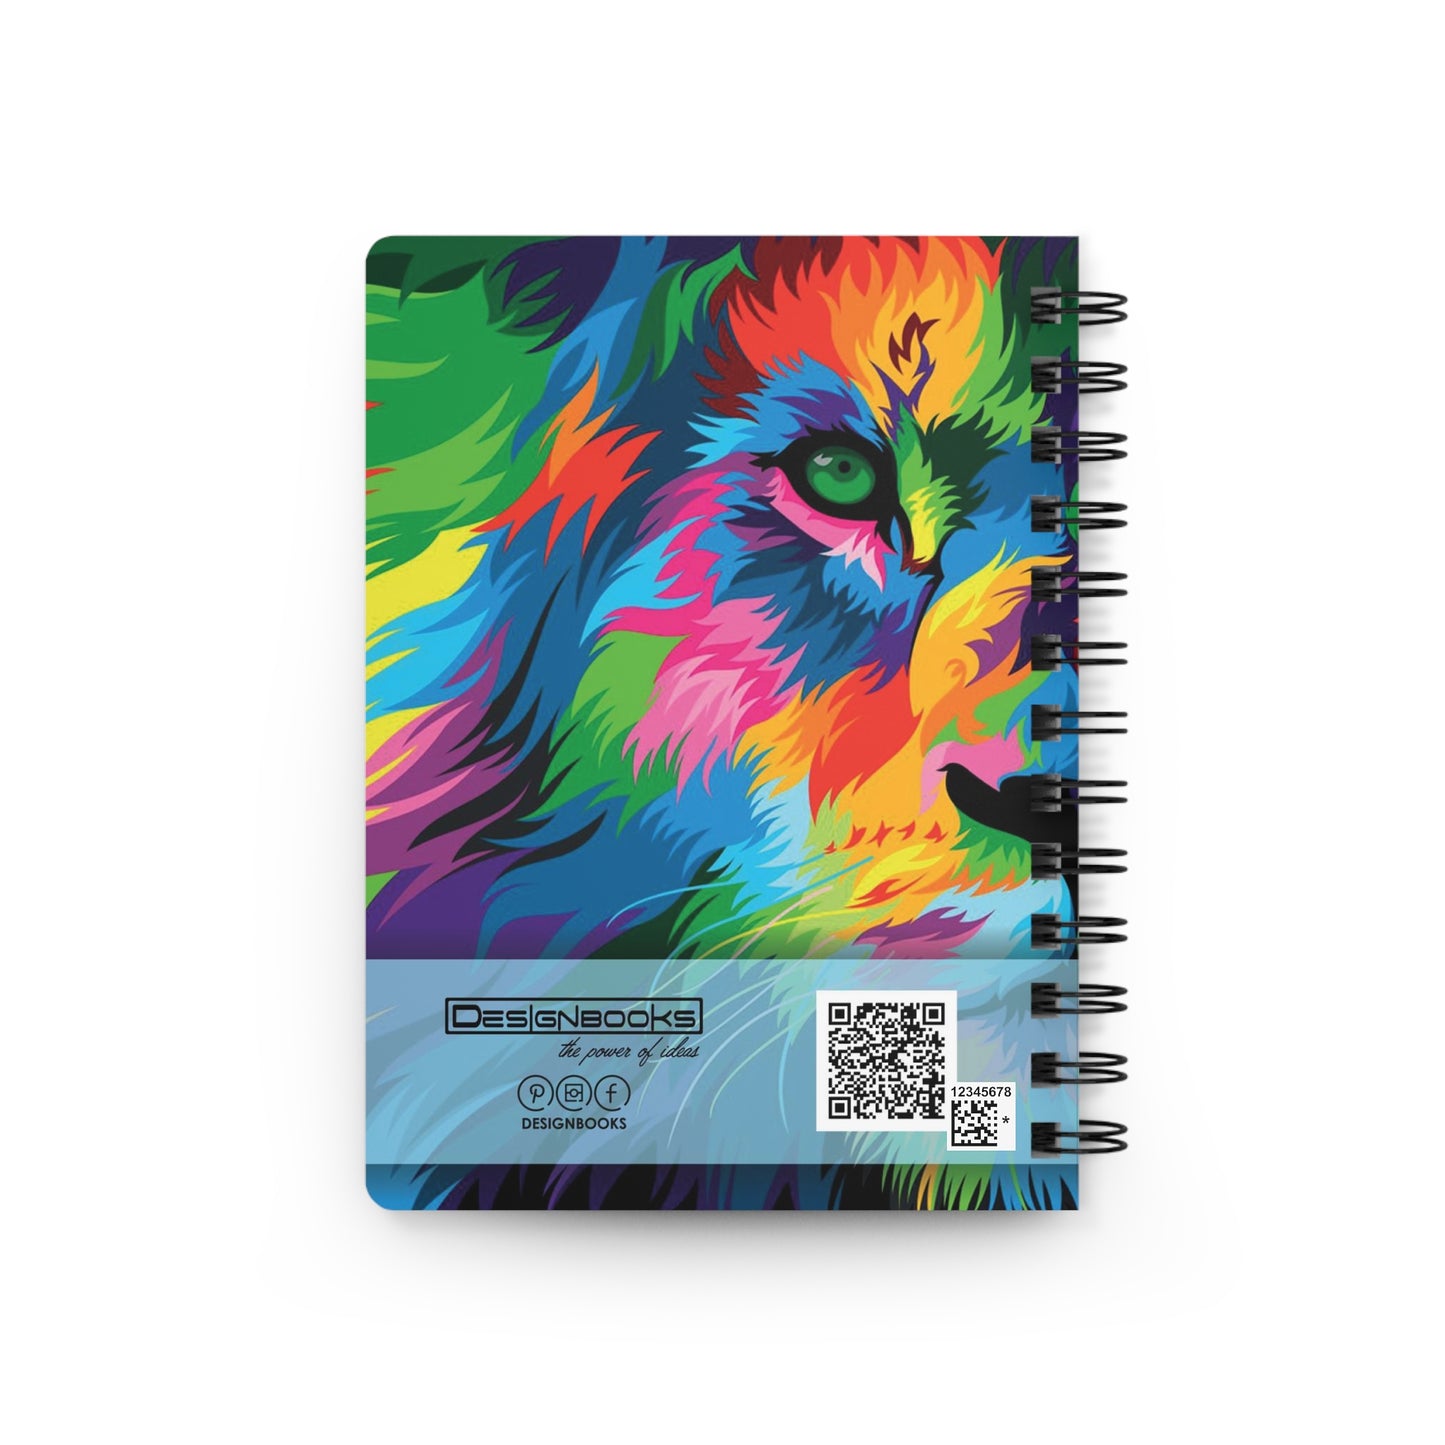 Lion full colors Spiral Bound Journal